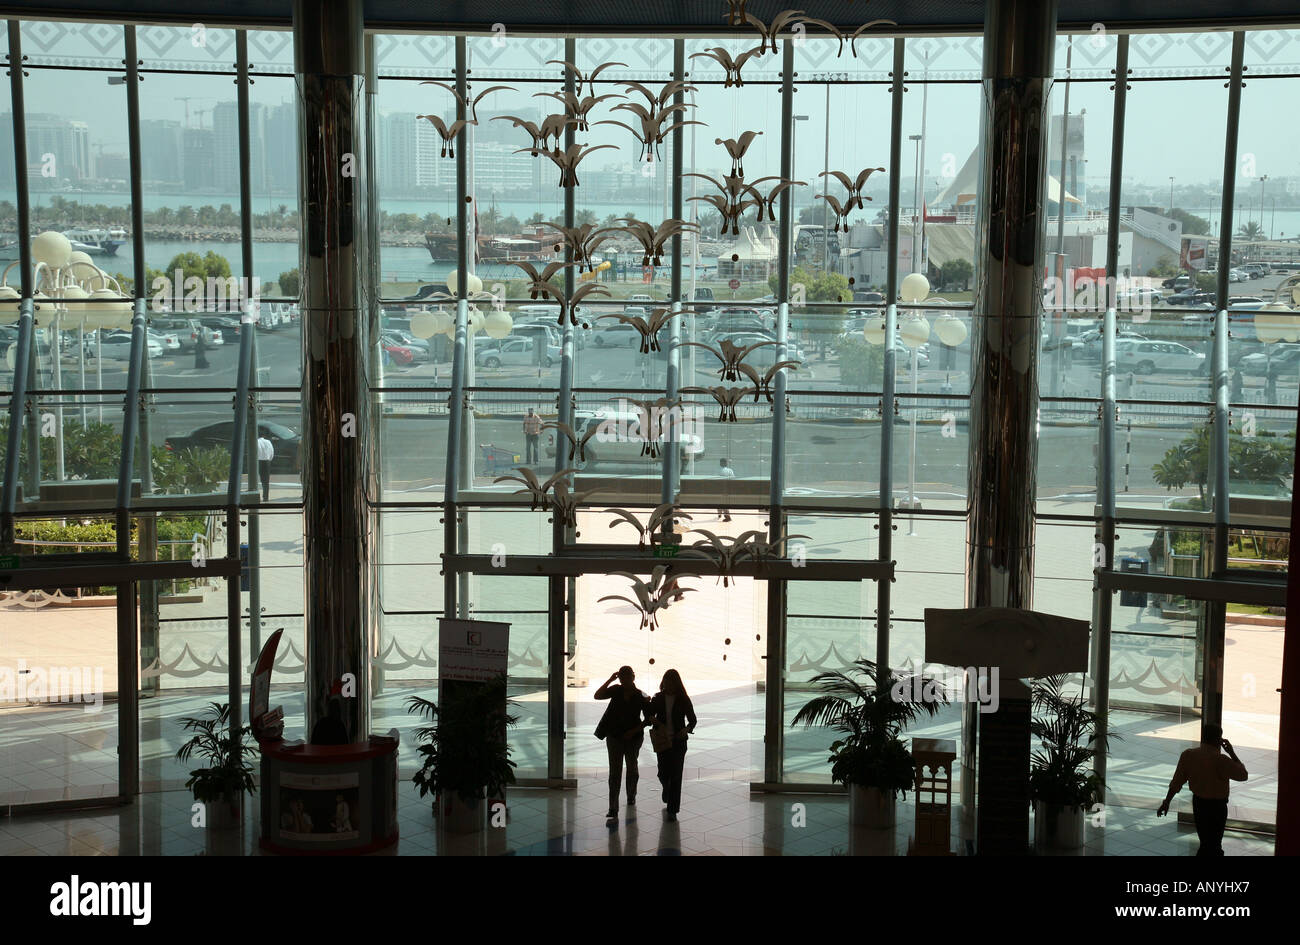 A couple enter the 'Marina Mall', Abu Dhabi city, silhouetted against the huge glass frontage of the Mall Stock Photo